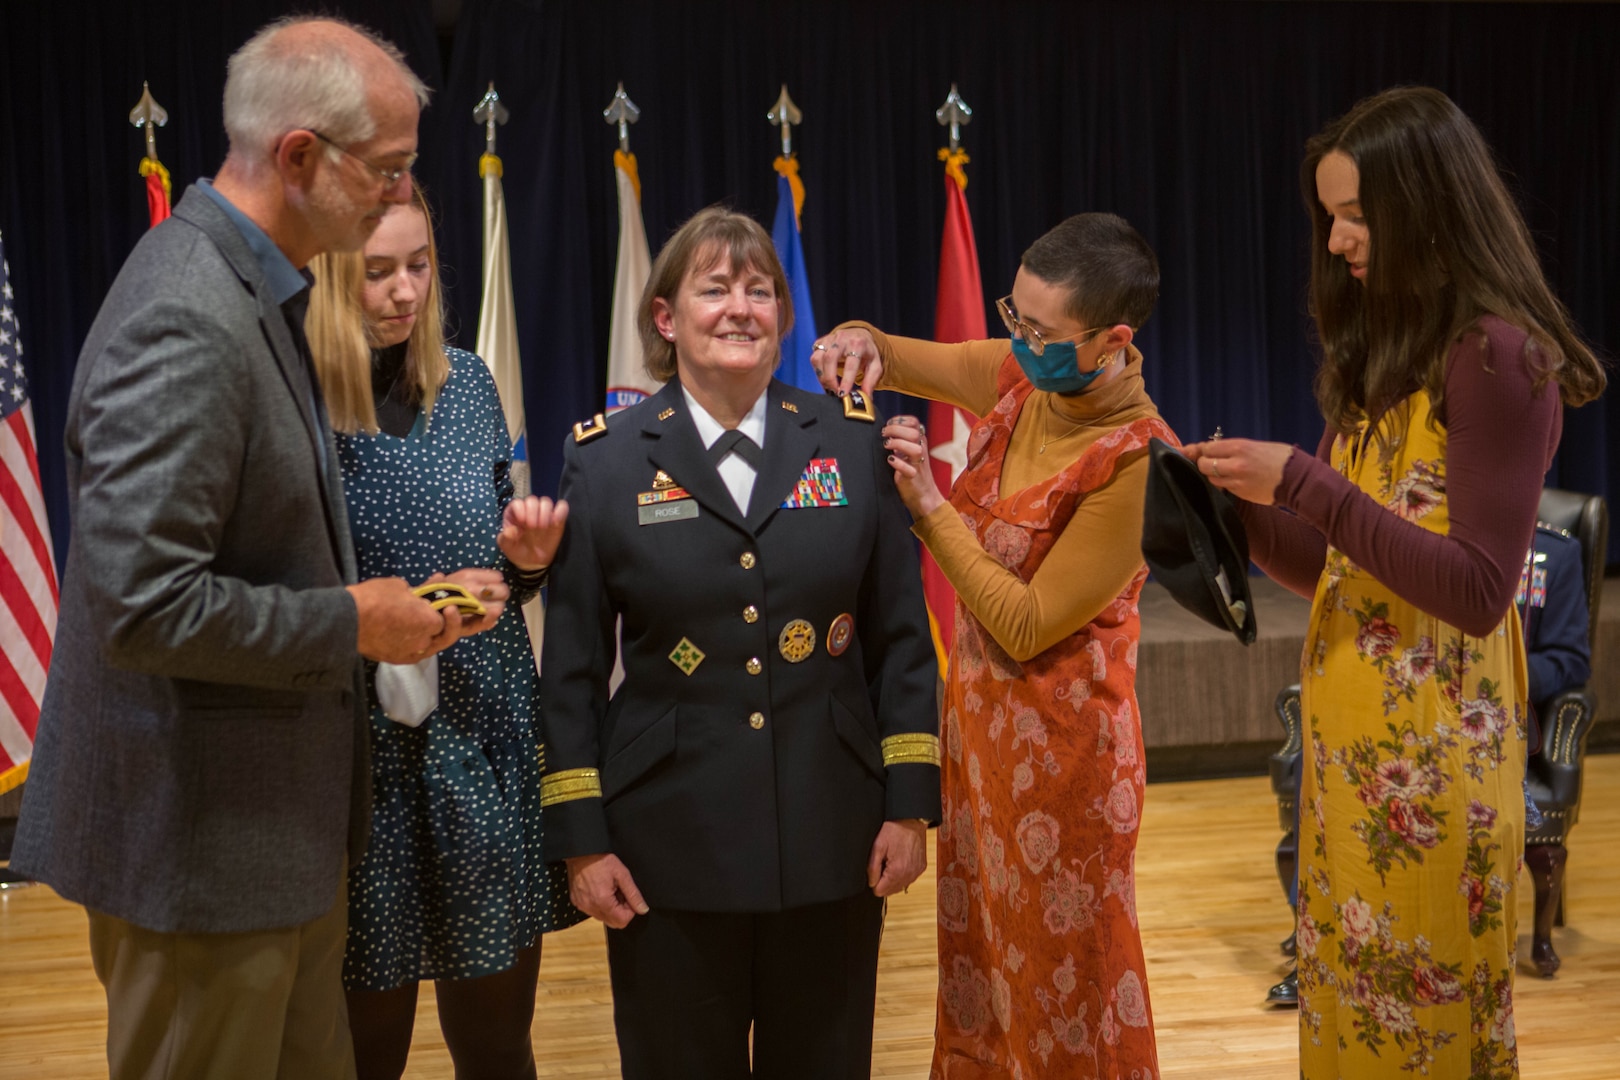 Brig. Gen. Michelle M. Rose is promoted to major general Dec. 18, 2020, during a ceremony at Peterson Air Force Base in Colorado Springs, Colorado.